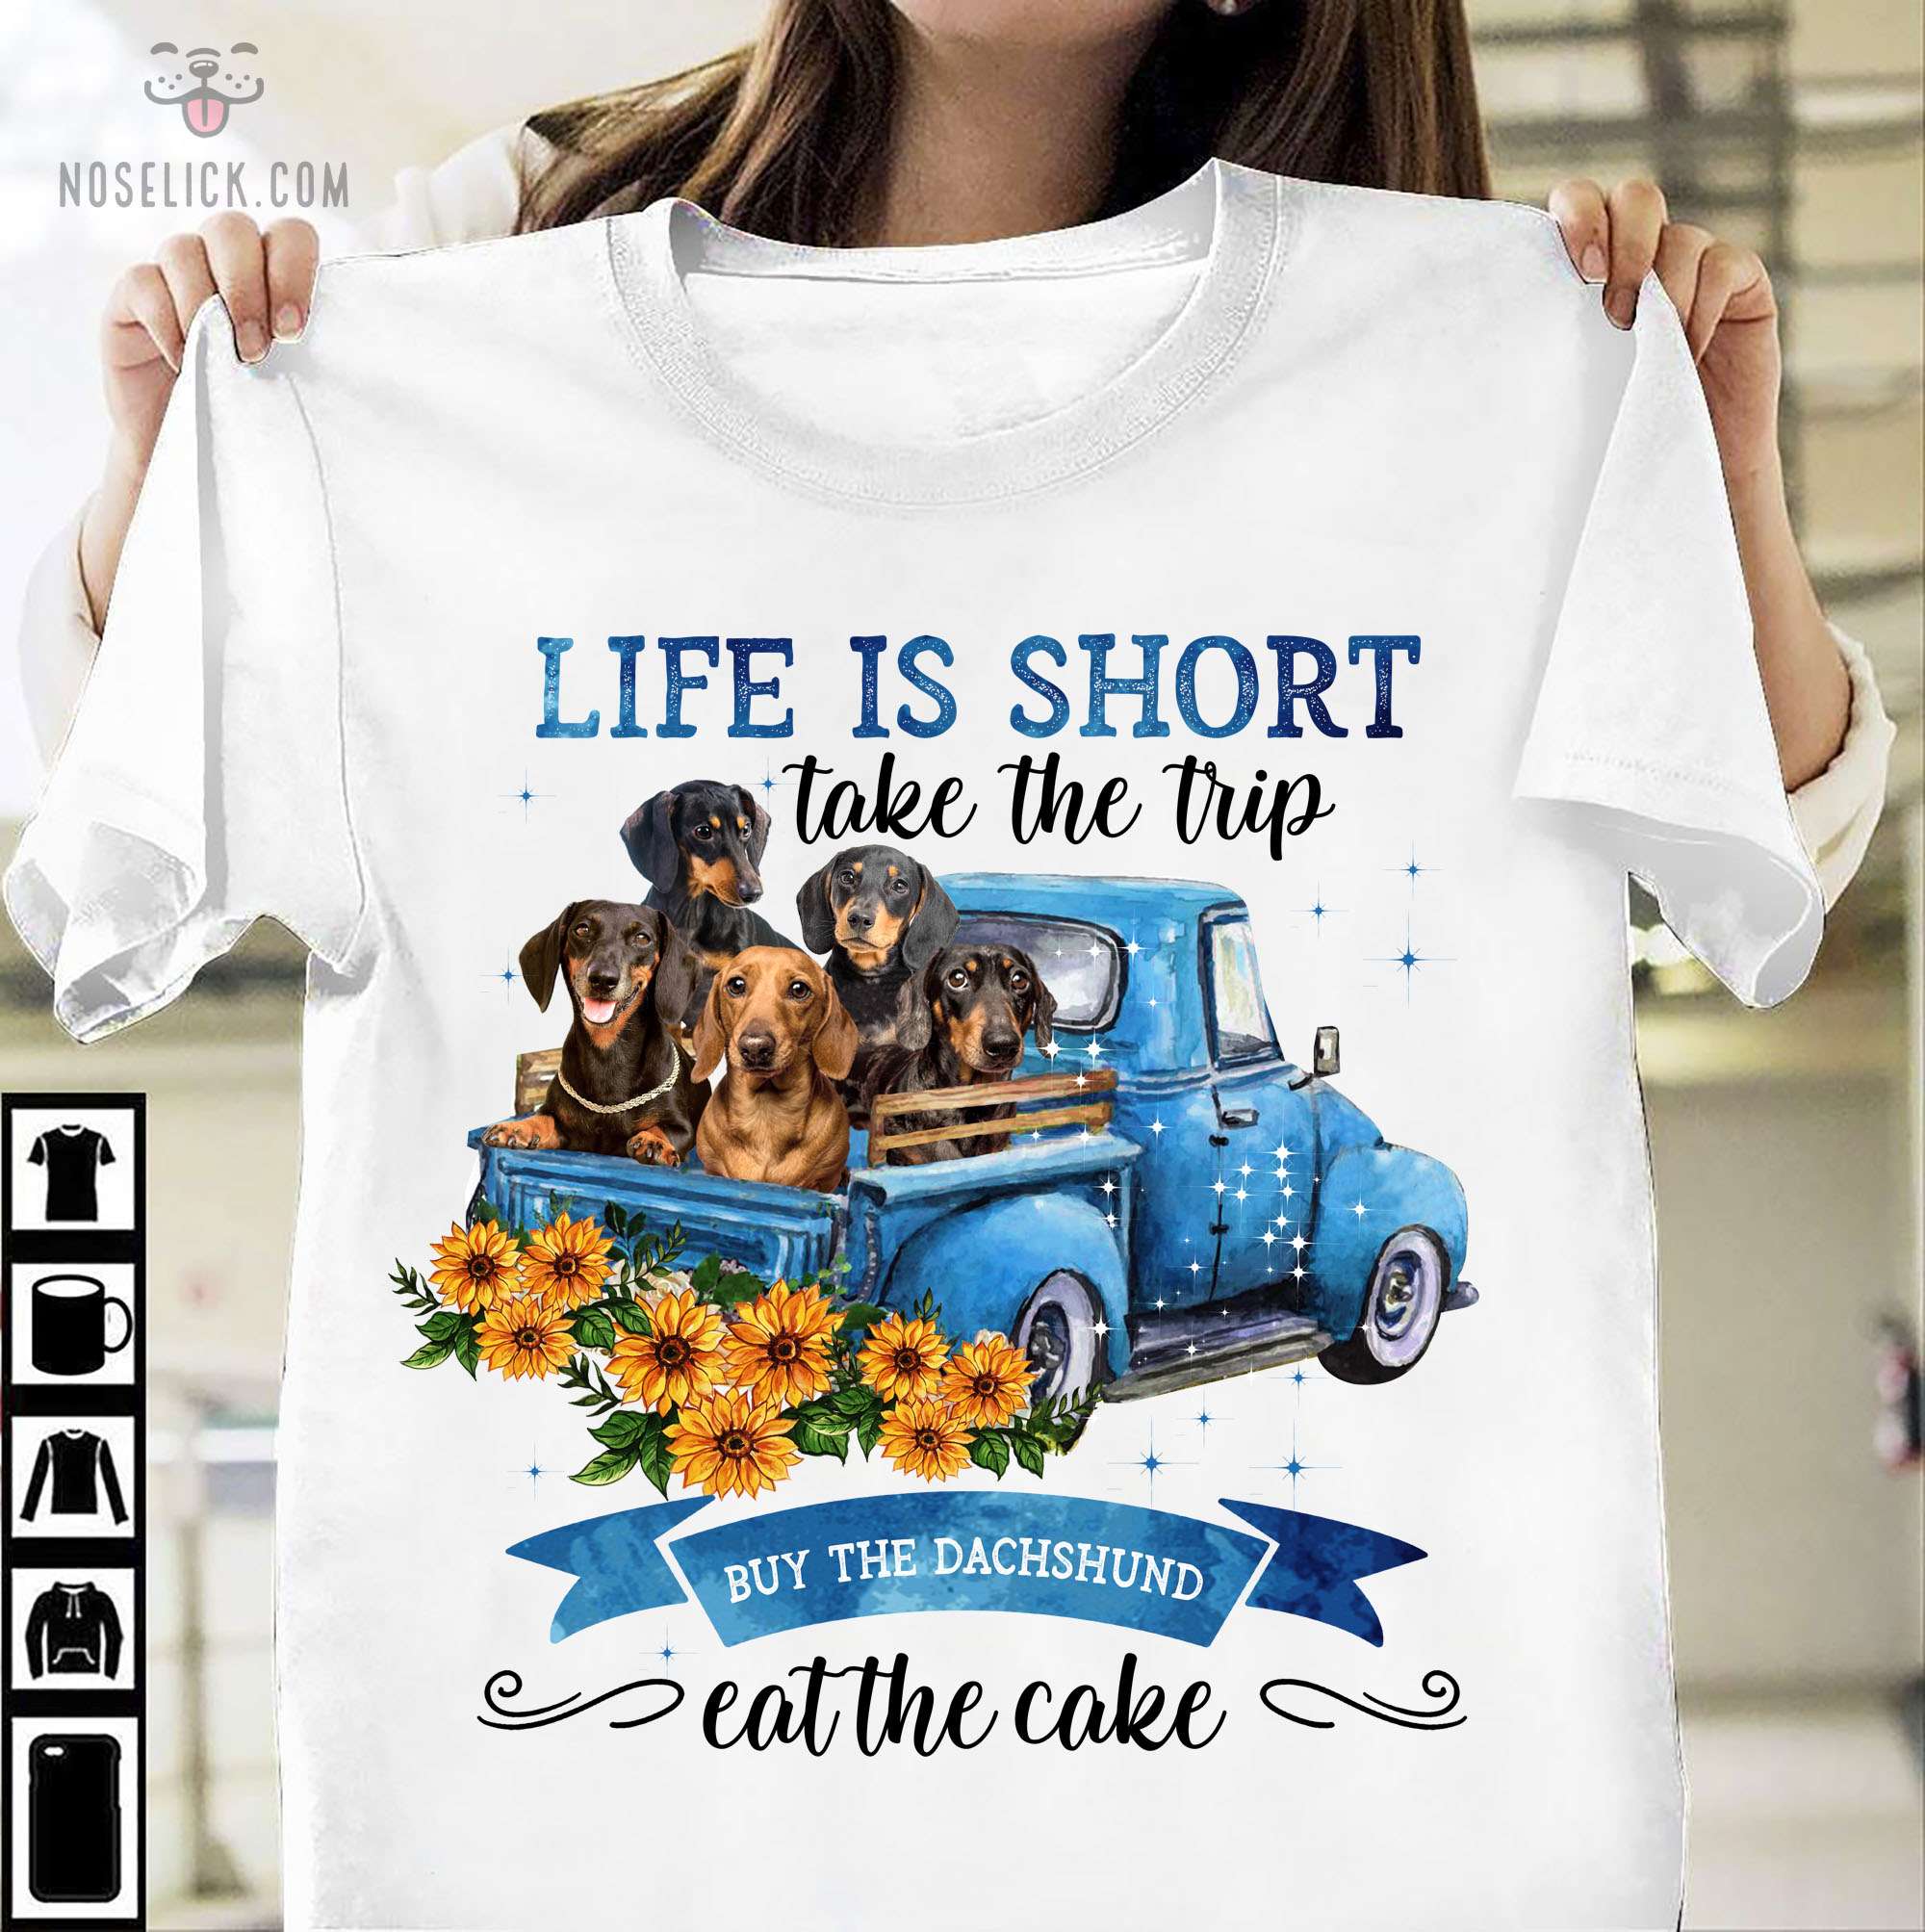 Life is short take the trip buy the Dachshund eat the cake - Dachshund on truck